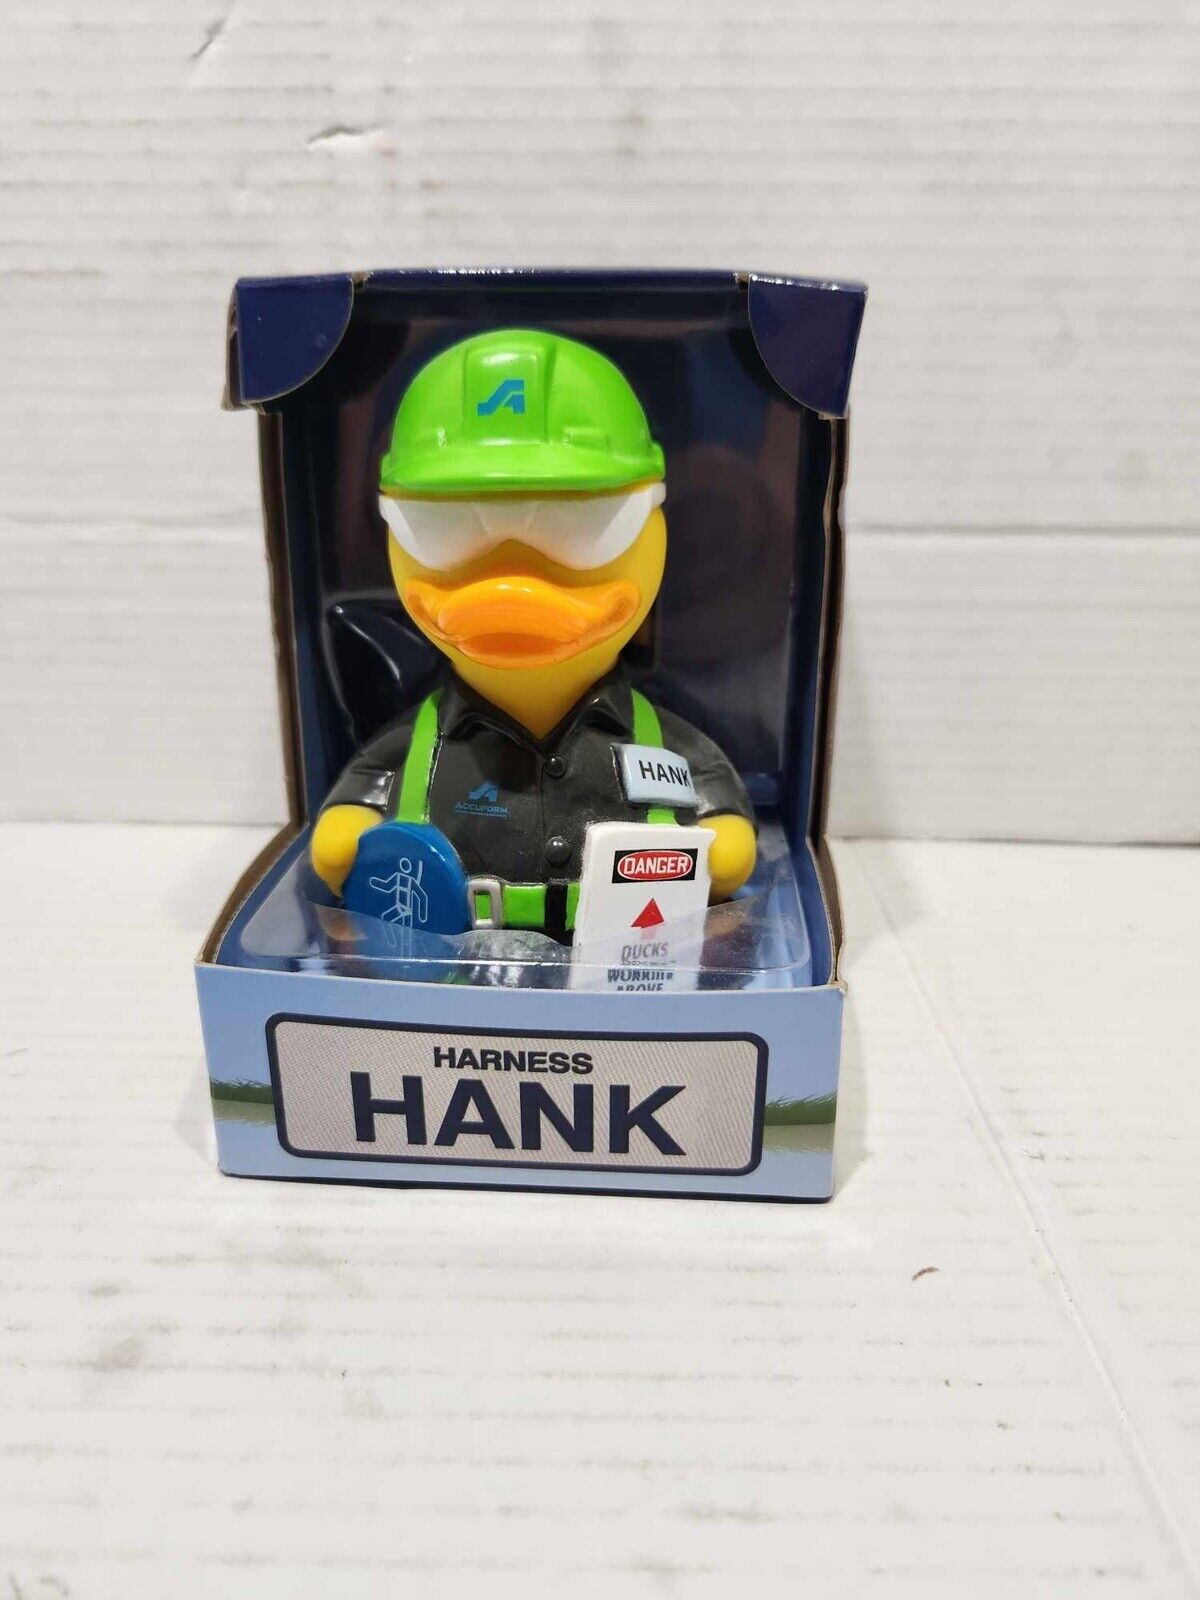 2017 Harness Hank Limited Edition OSHA Safety Ducks from AccuformNMC No.3 of 10 